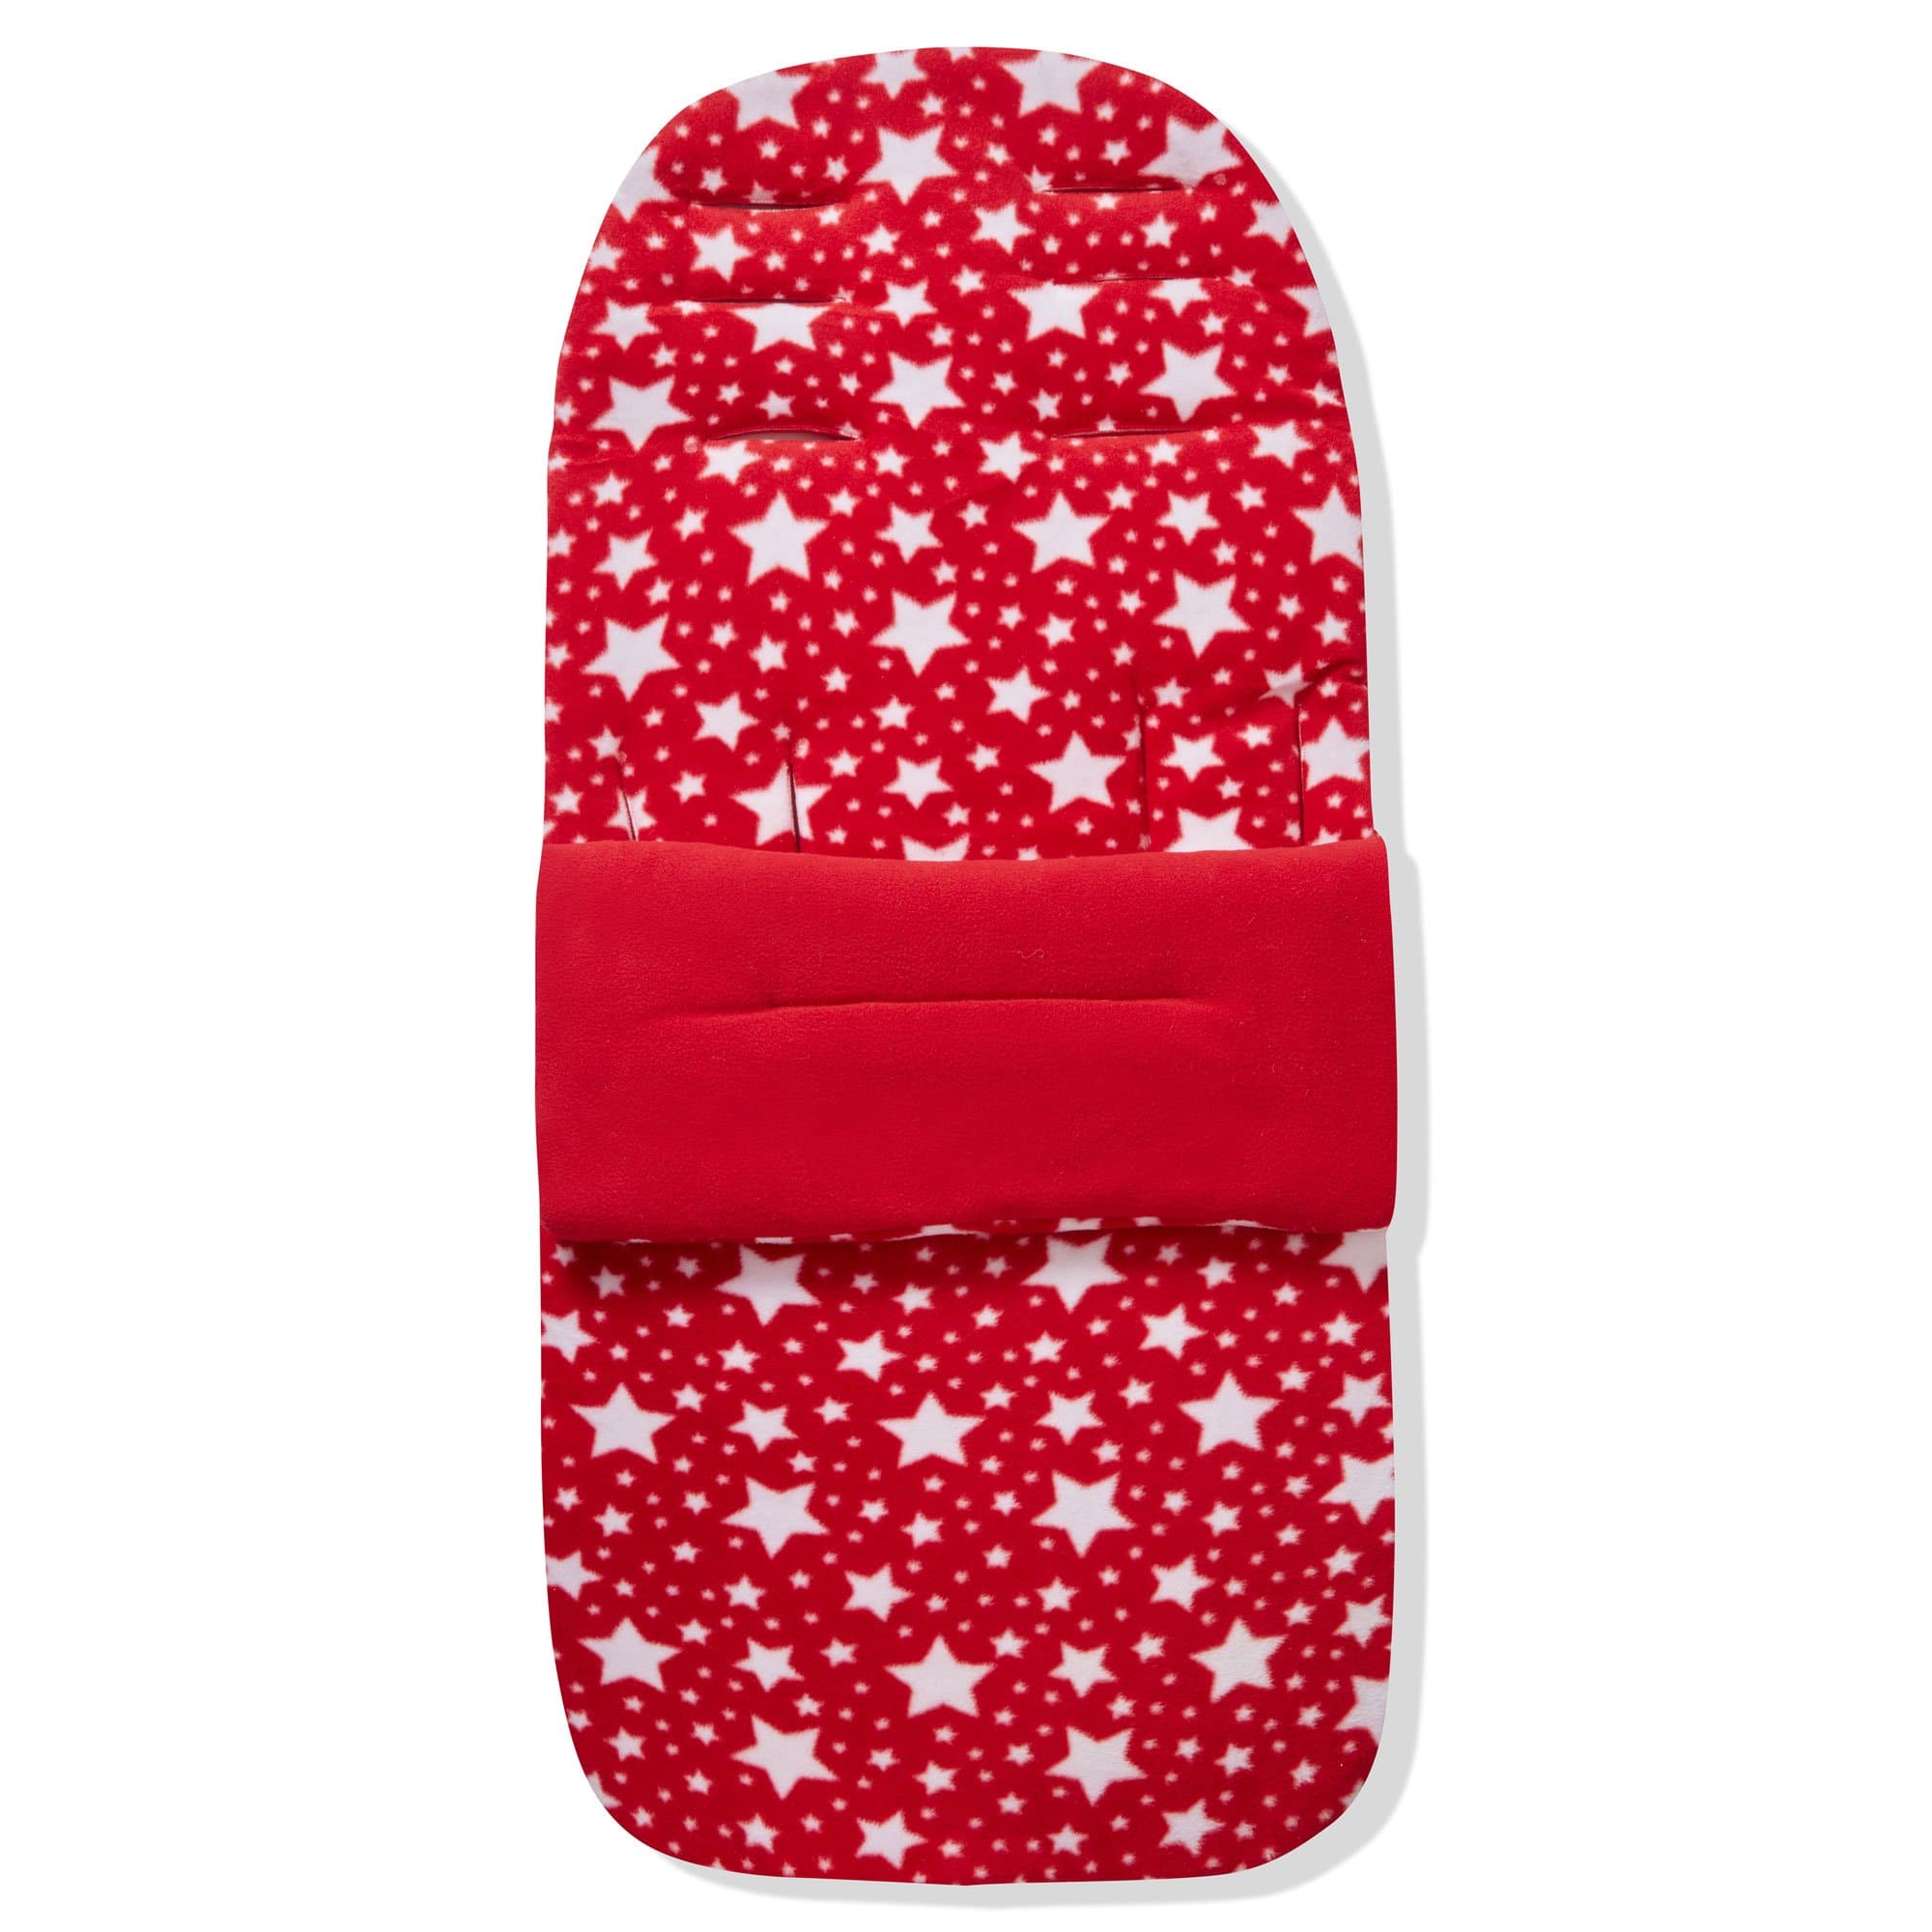 Fleece Footmuff / Cosy Toes Compatible With Bugaboo - Red Star / Fits All Models | For Your Little One